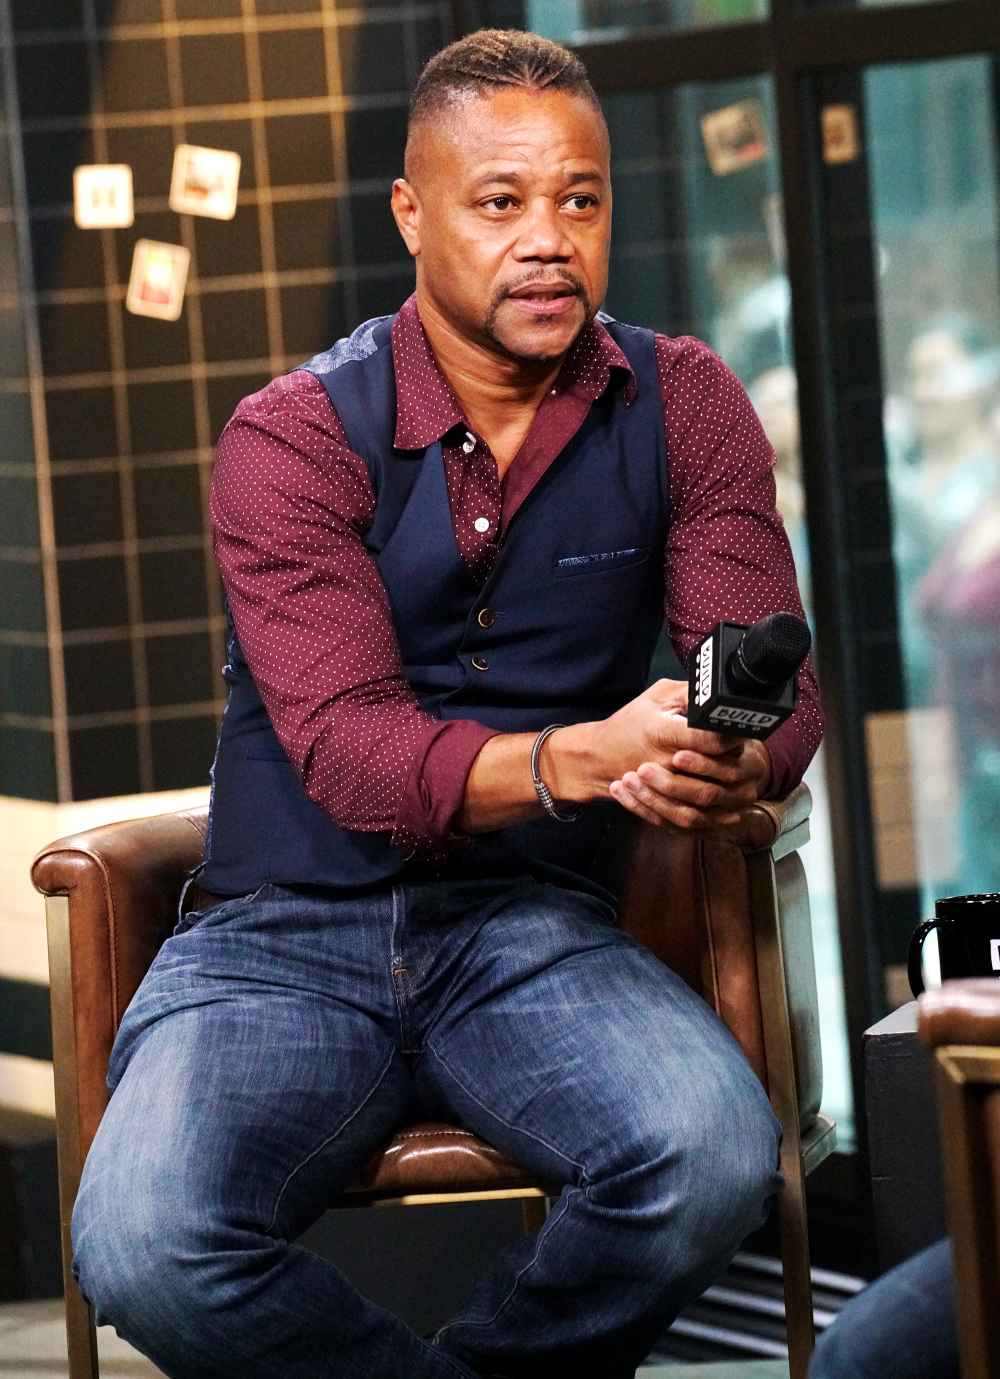 Cuba Gooding Jr. Accused Allegedly Groping Woman NYC